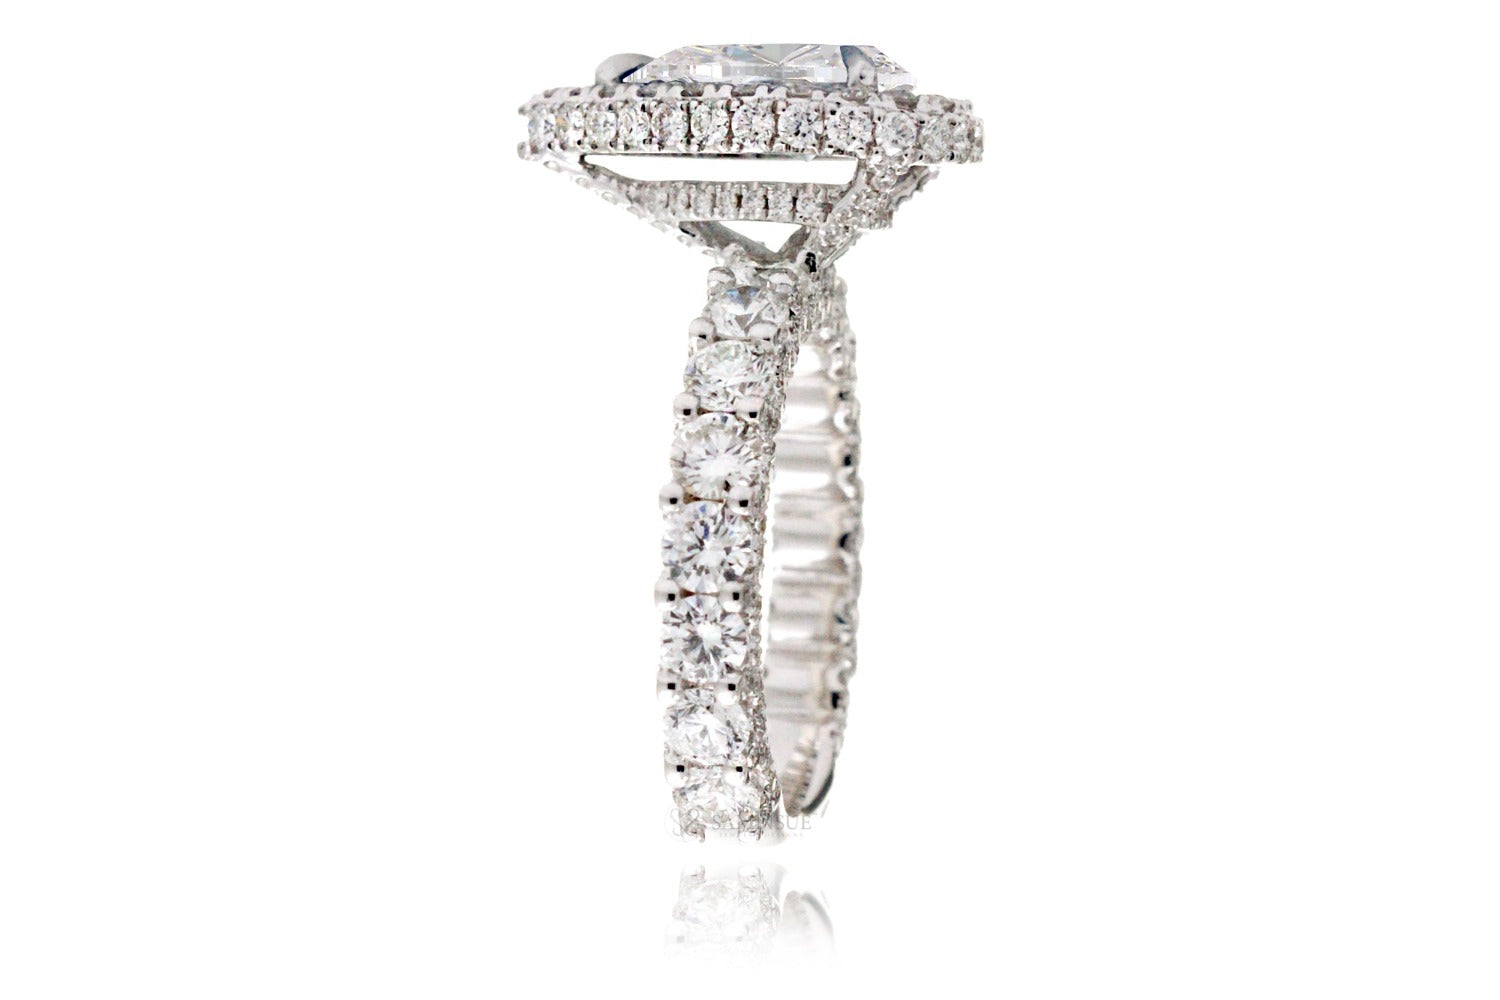 Pear diamond ring with two sided halo and u prong band in platinum